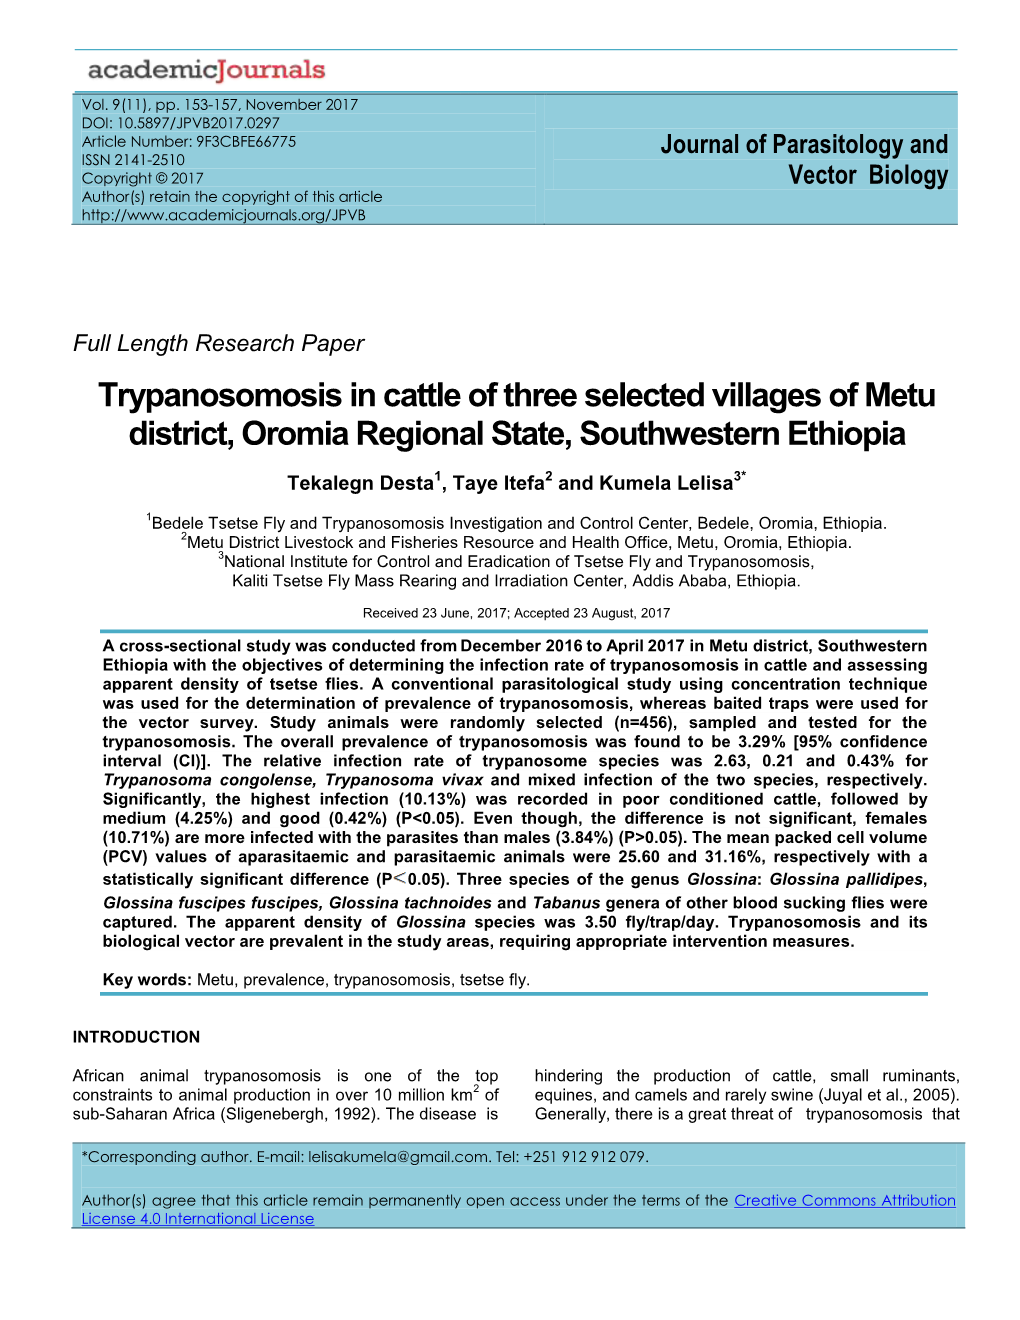 Trypanosomosis in Cattle of Three Selected Villages of Metu District, Oromia Regional State, Southwestern Ethiopia